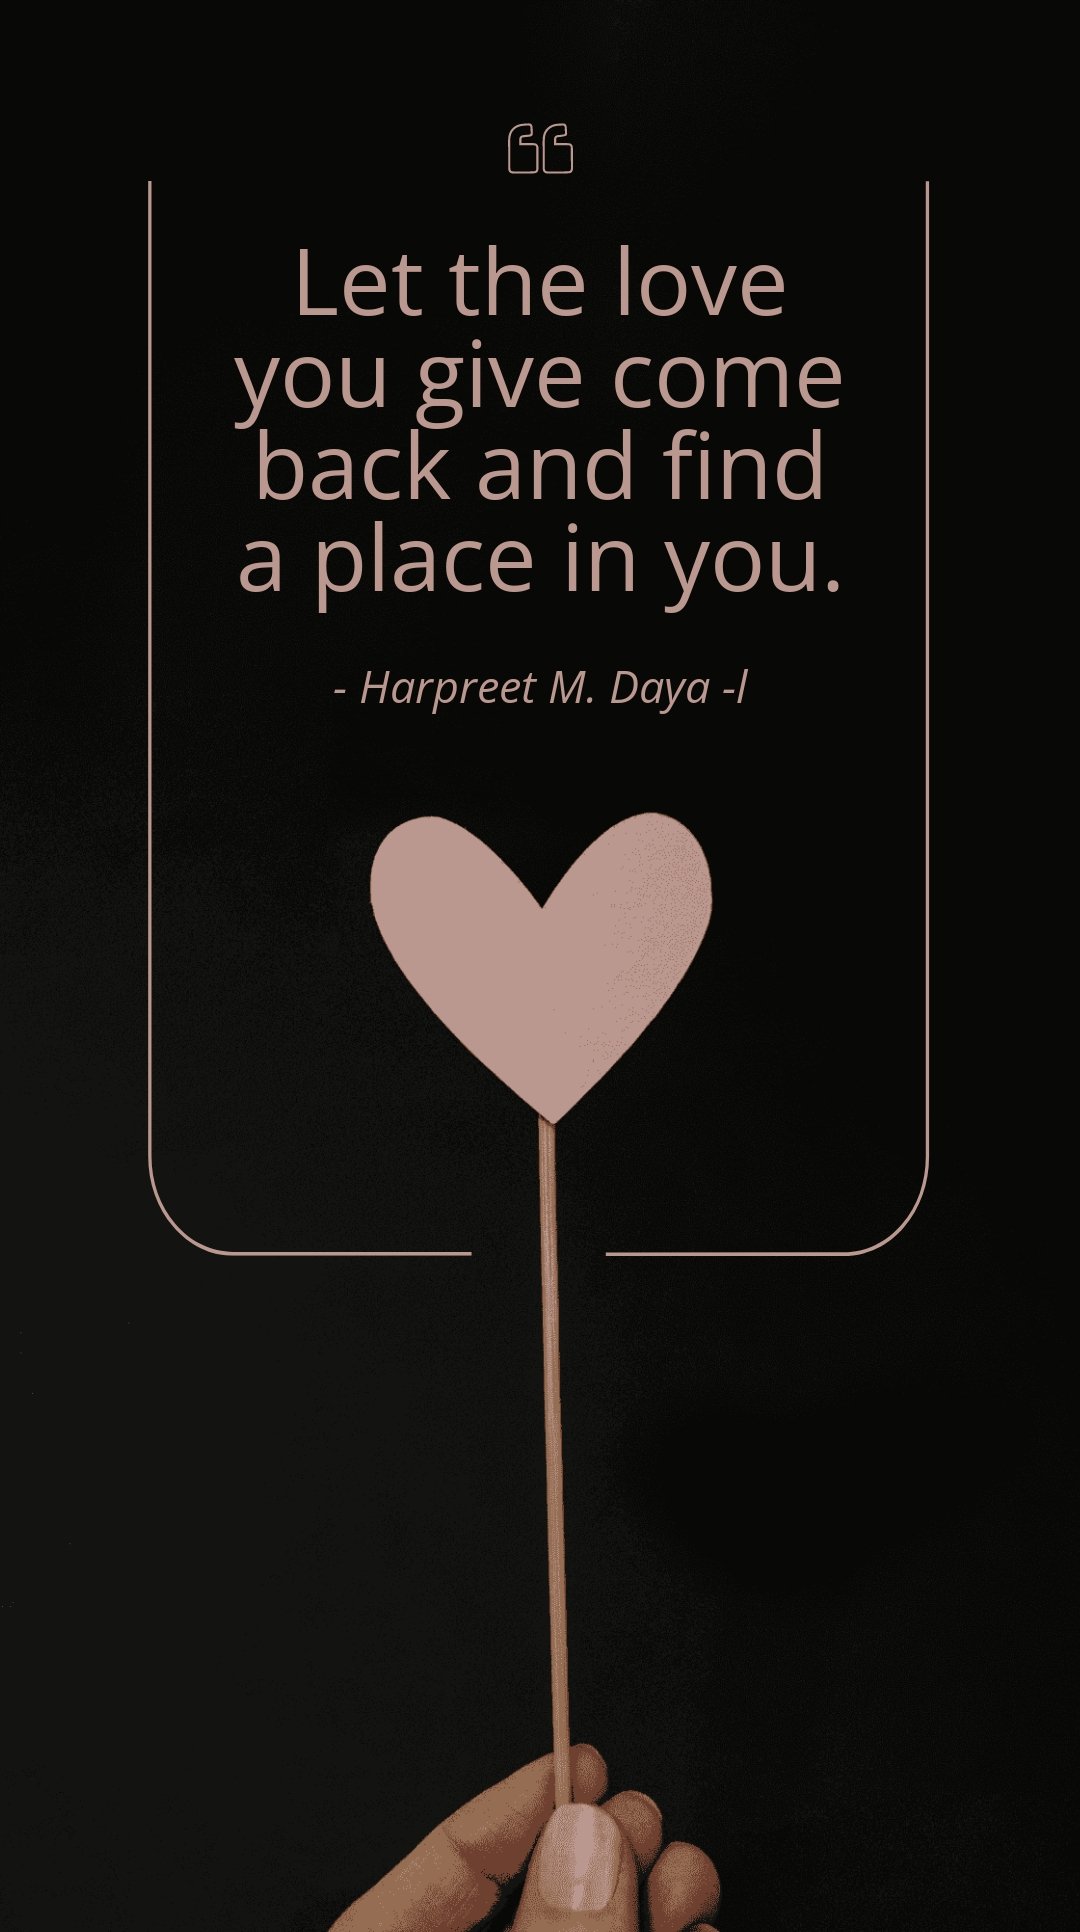 Harpreet M. Dayal - Let the love you give come back and find a place in you.